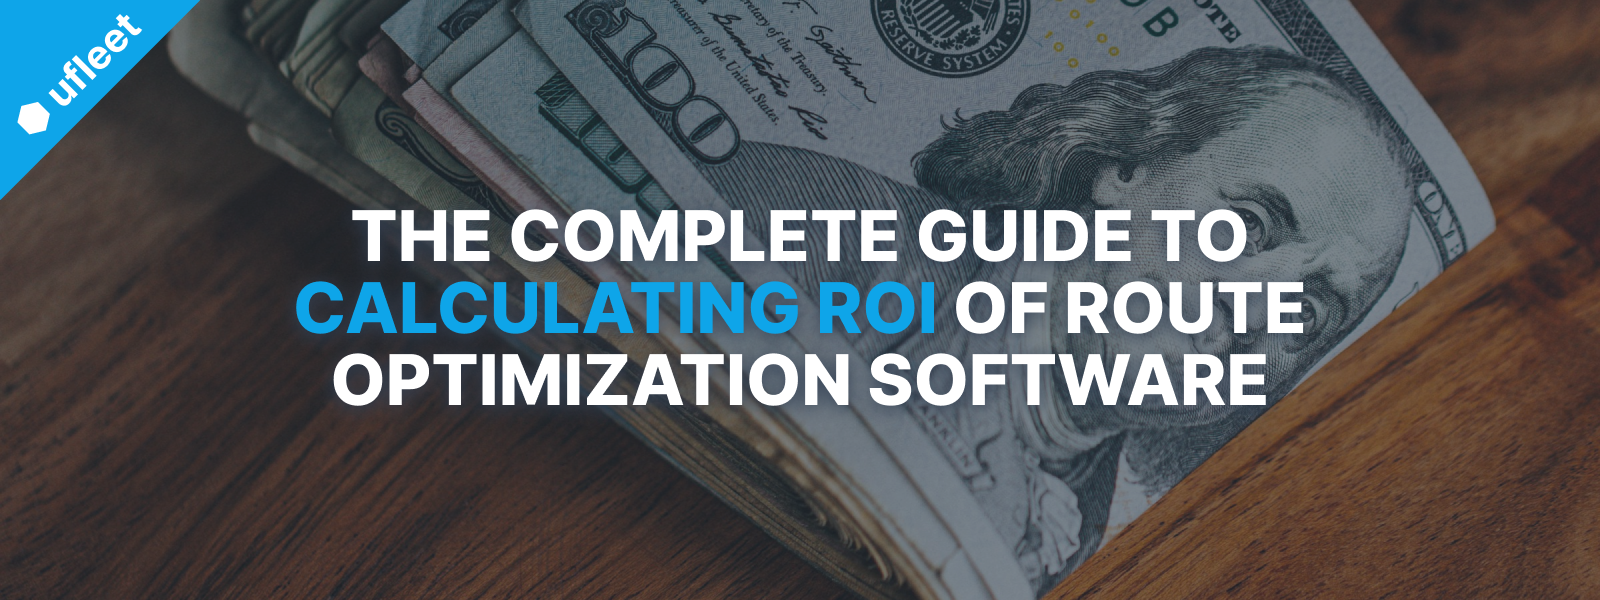 ROI of Route Optimization Software